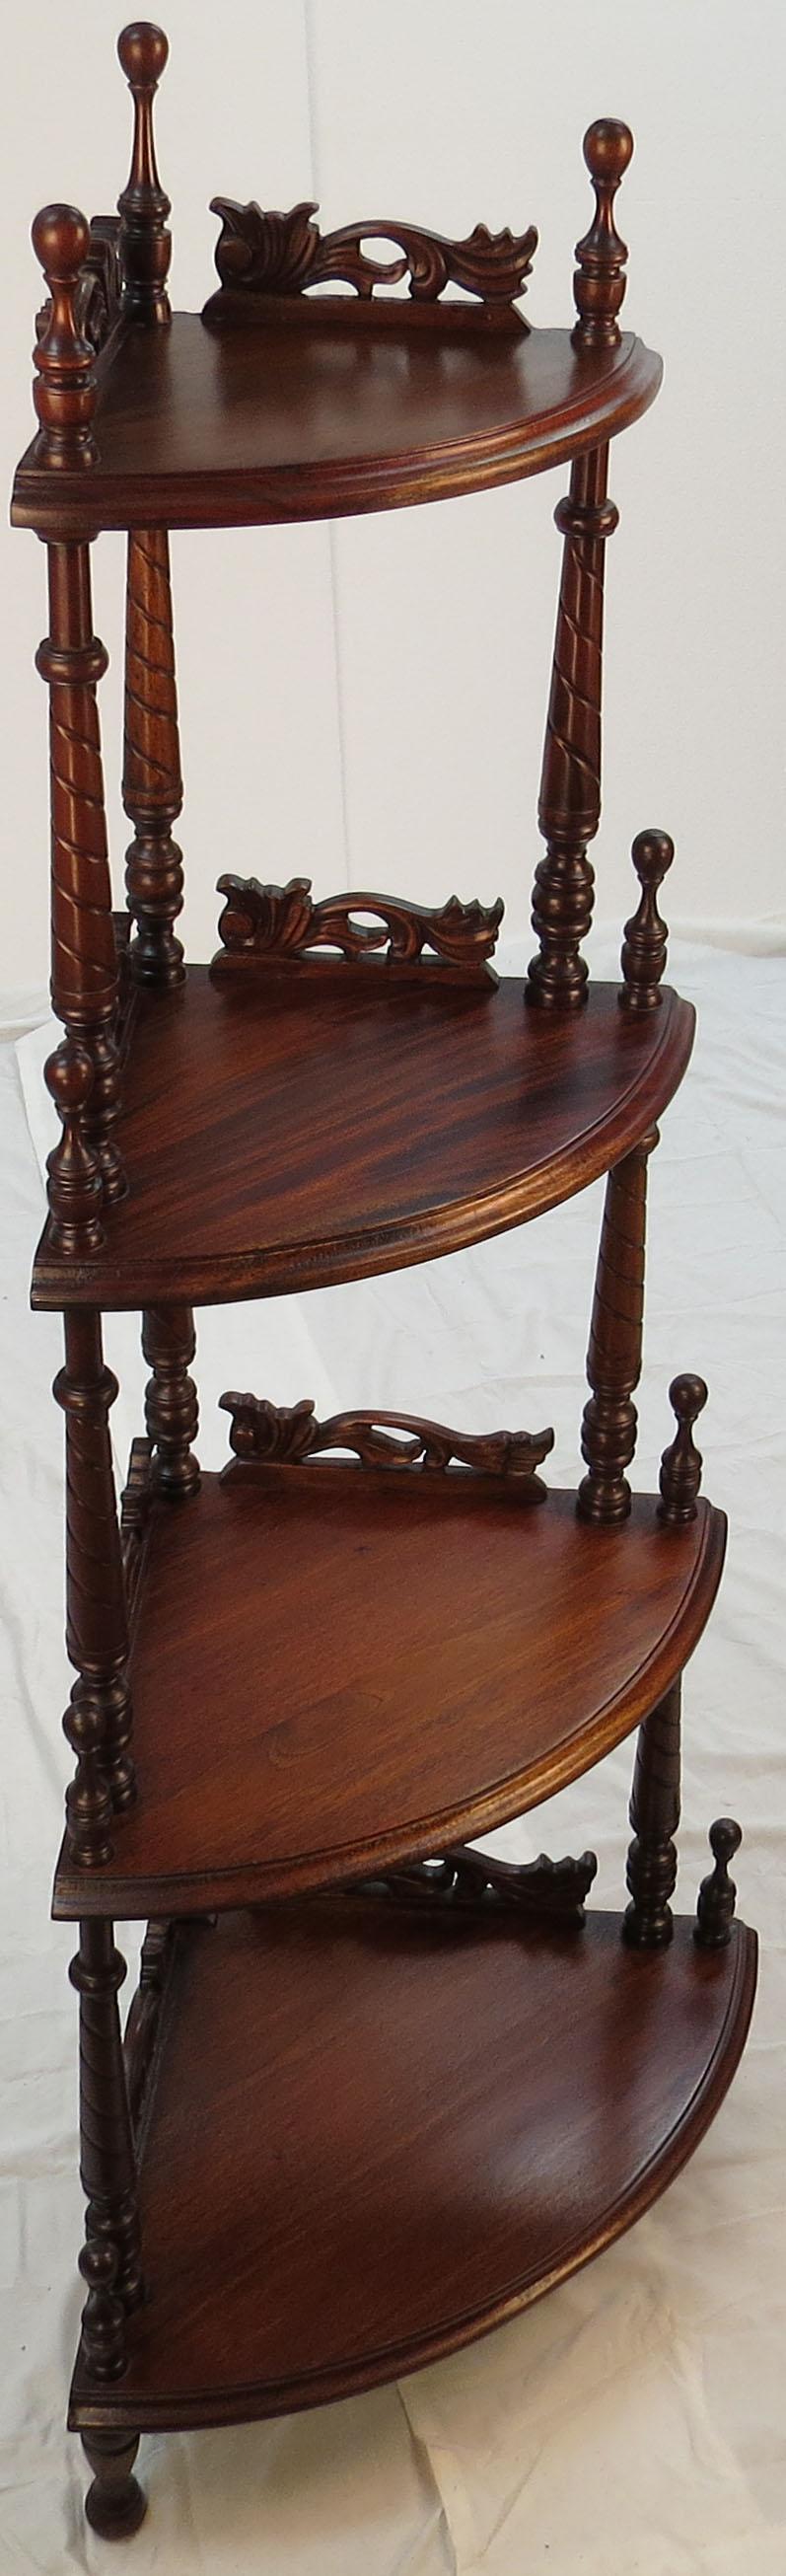 This stunning small four-tier corner whatnot was made in England sometime, circa 1960. It’s done in mahogany wood and features turned and tapered columns that are capped off with turned finials. The front edges of each shelf is curved out and